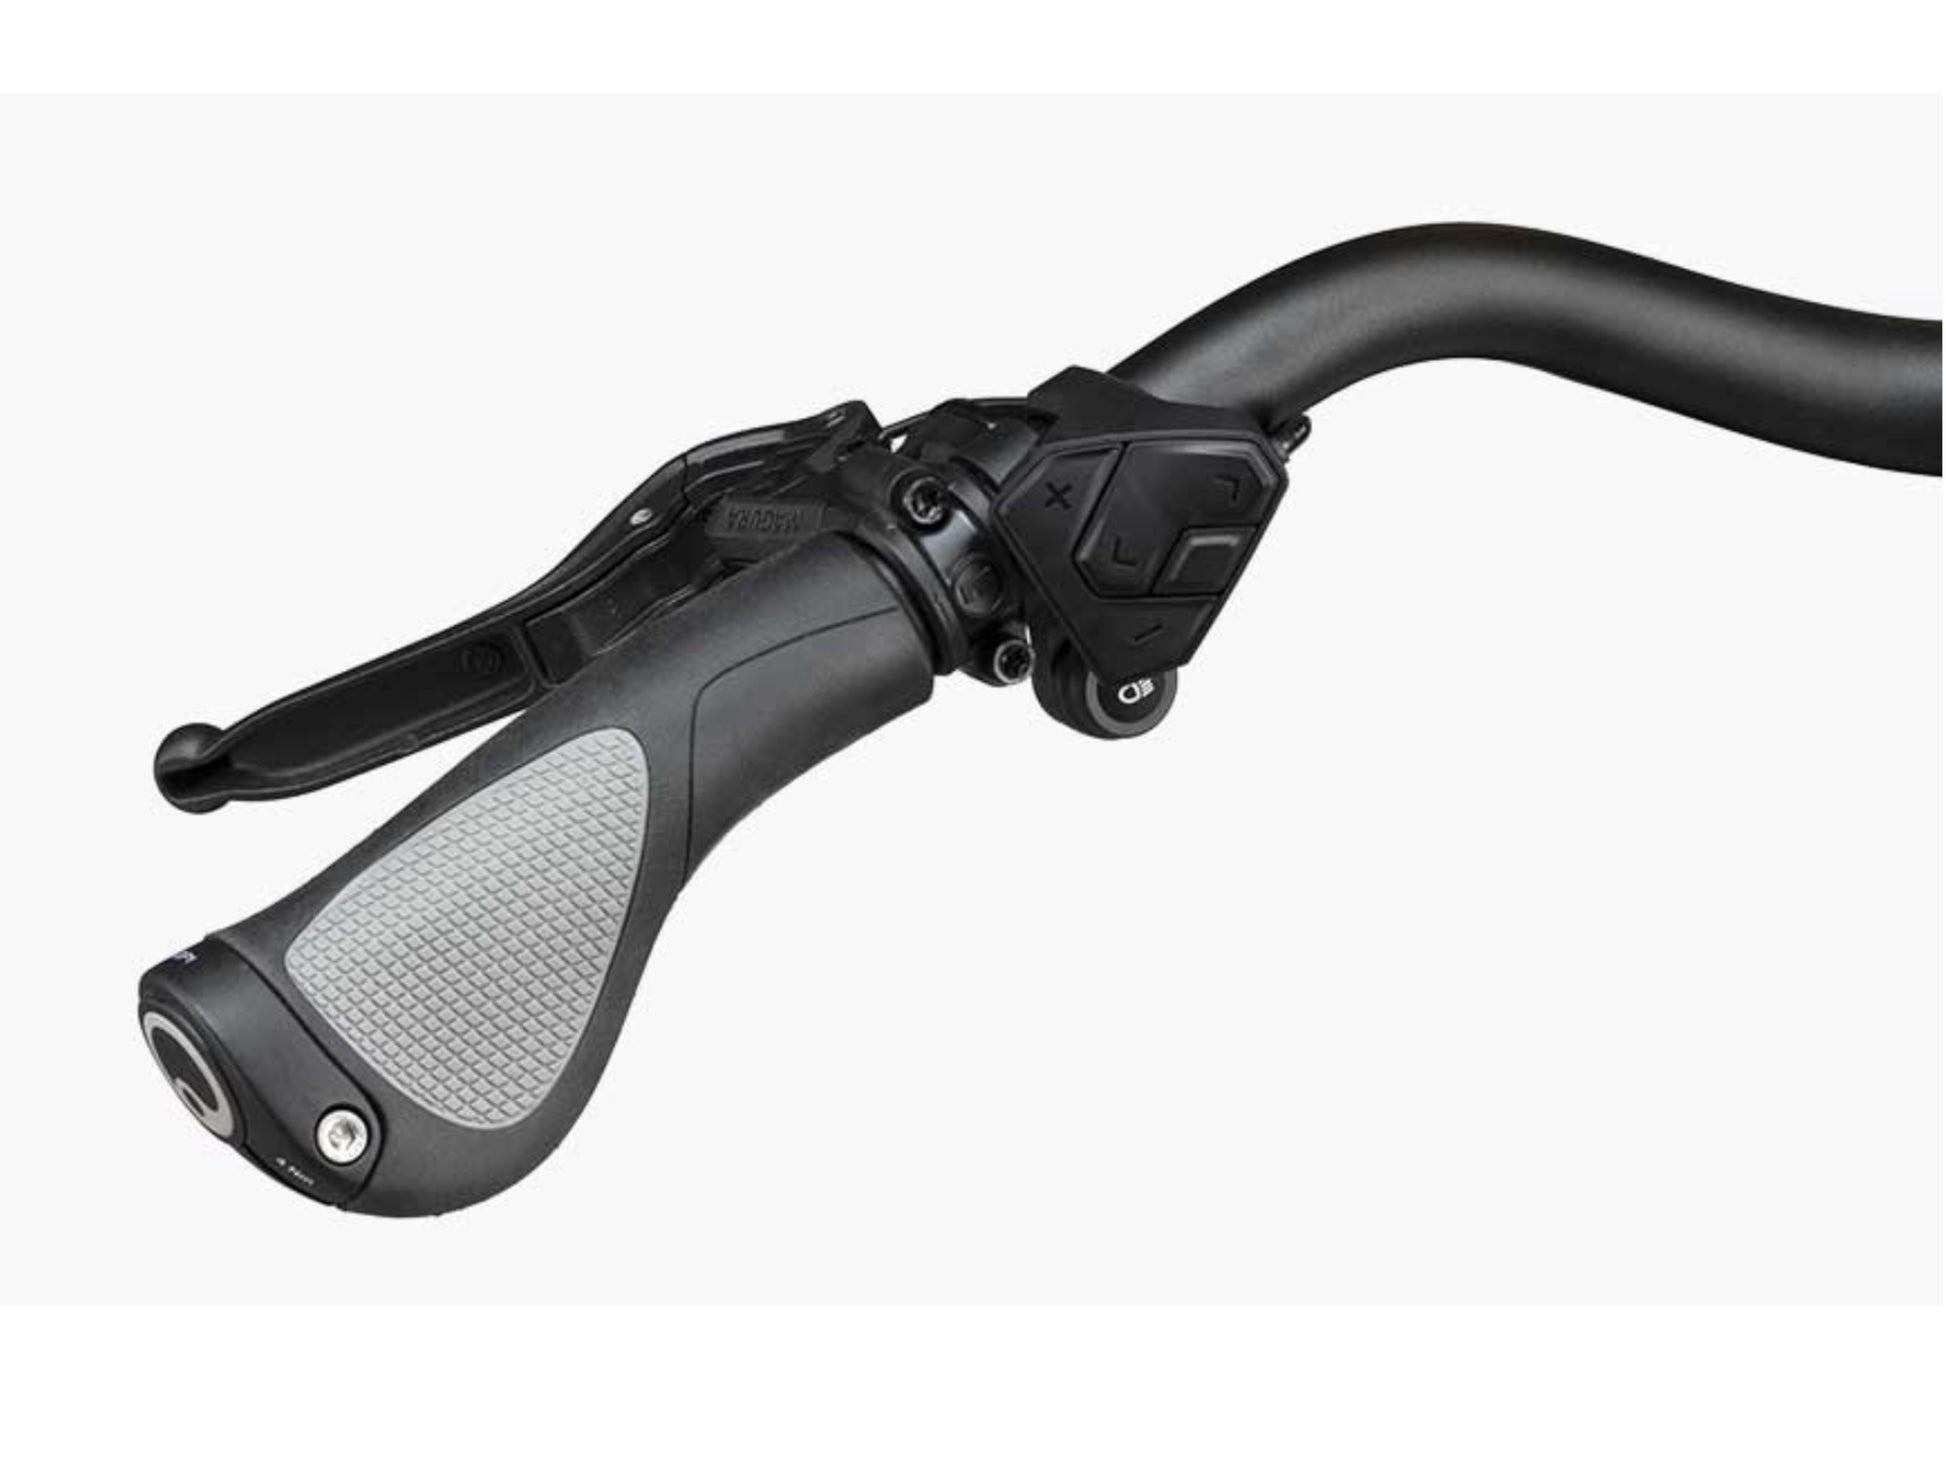 Riese and Muller Supercharger GT Touring emtb hardtail close up comfort kit option